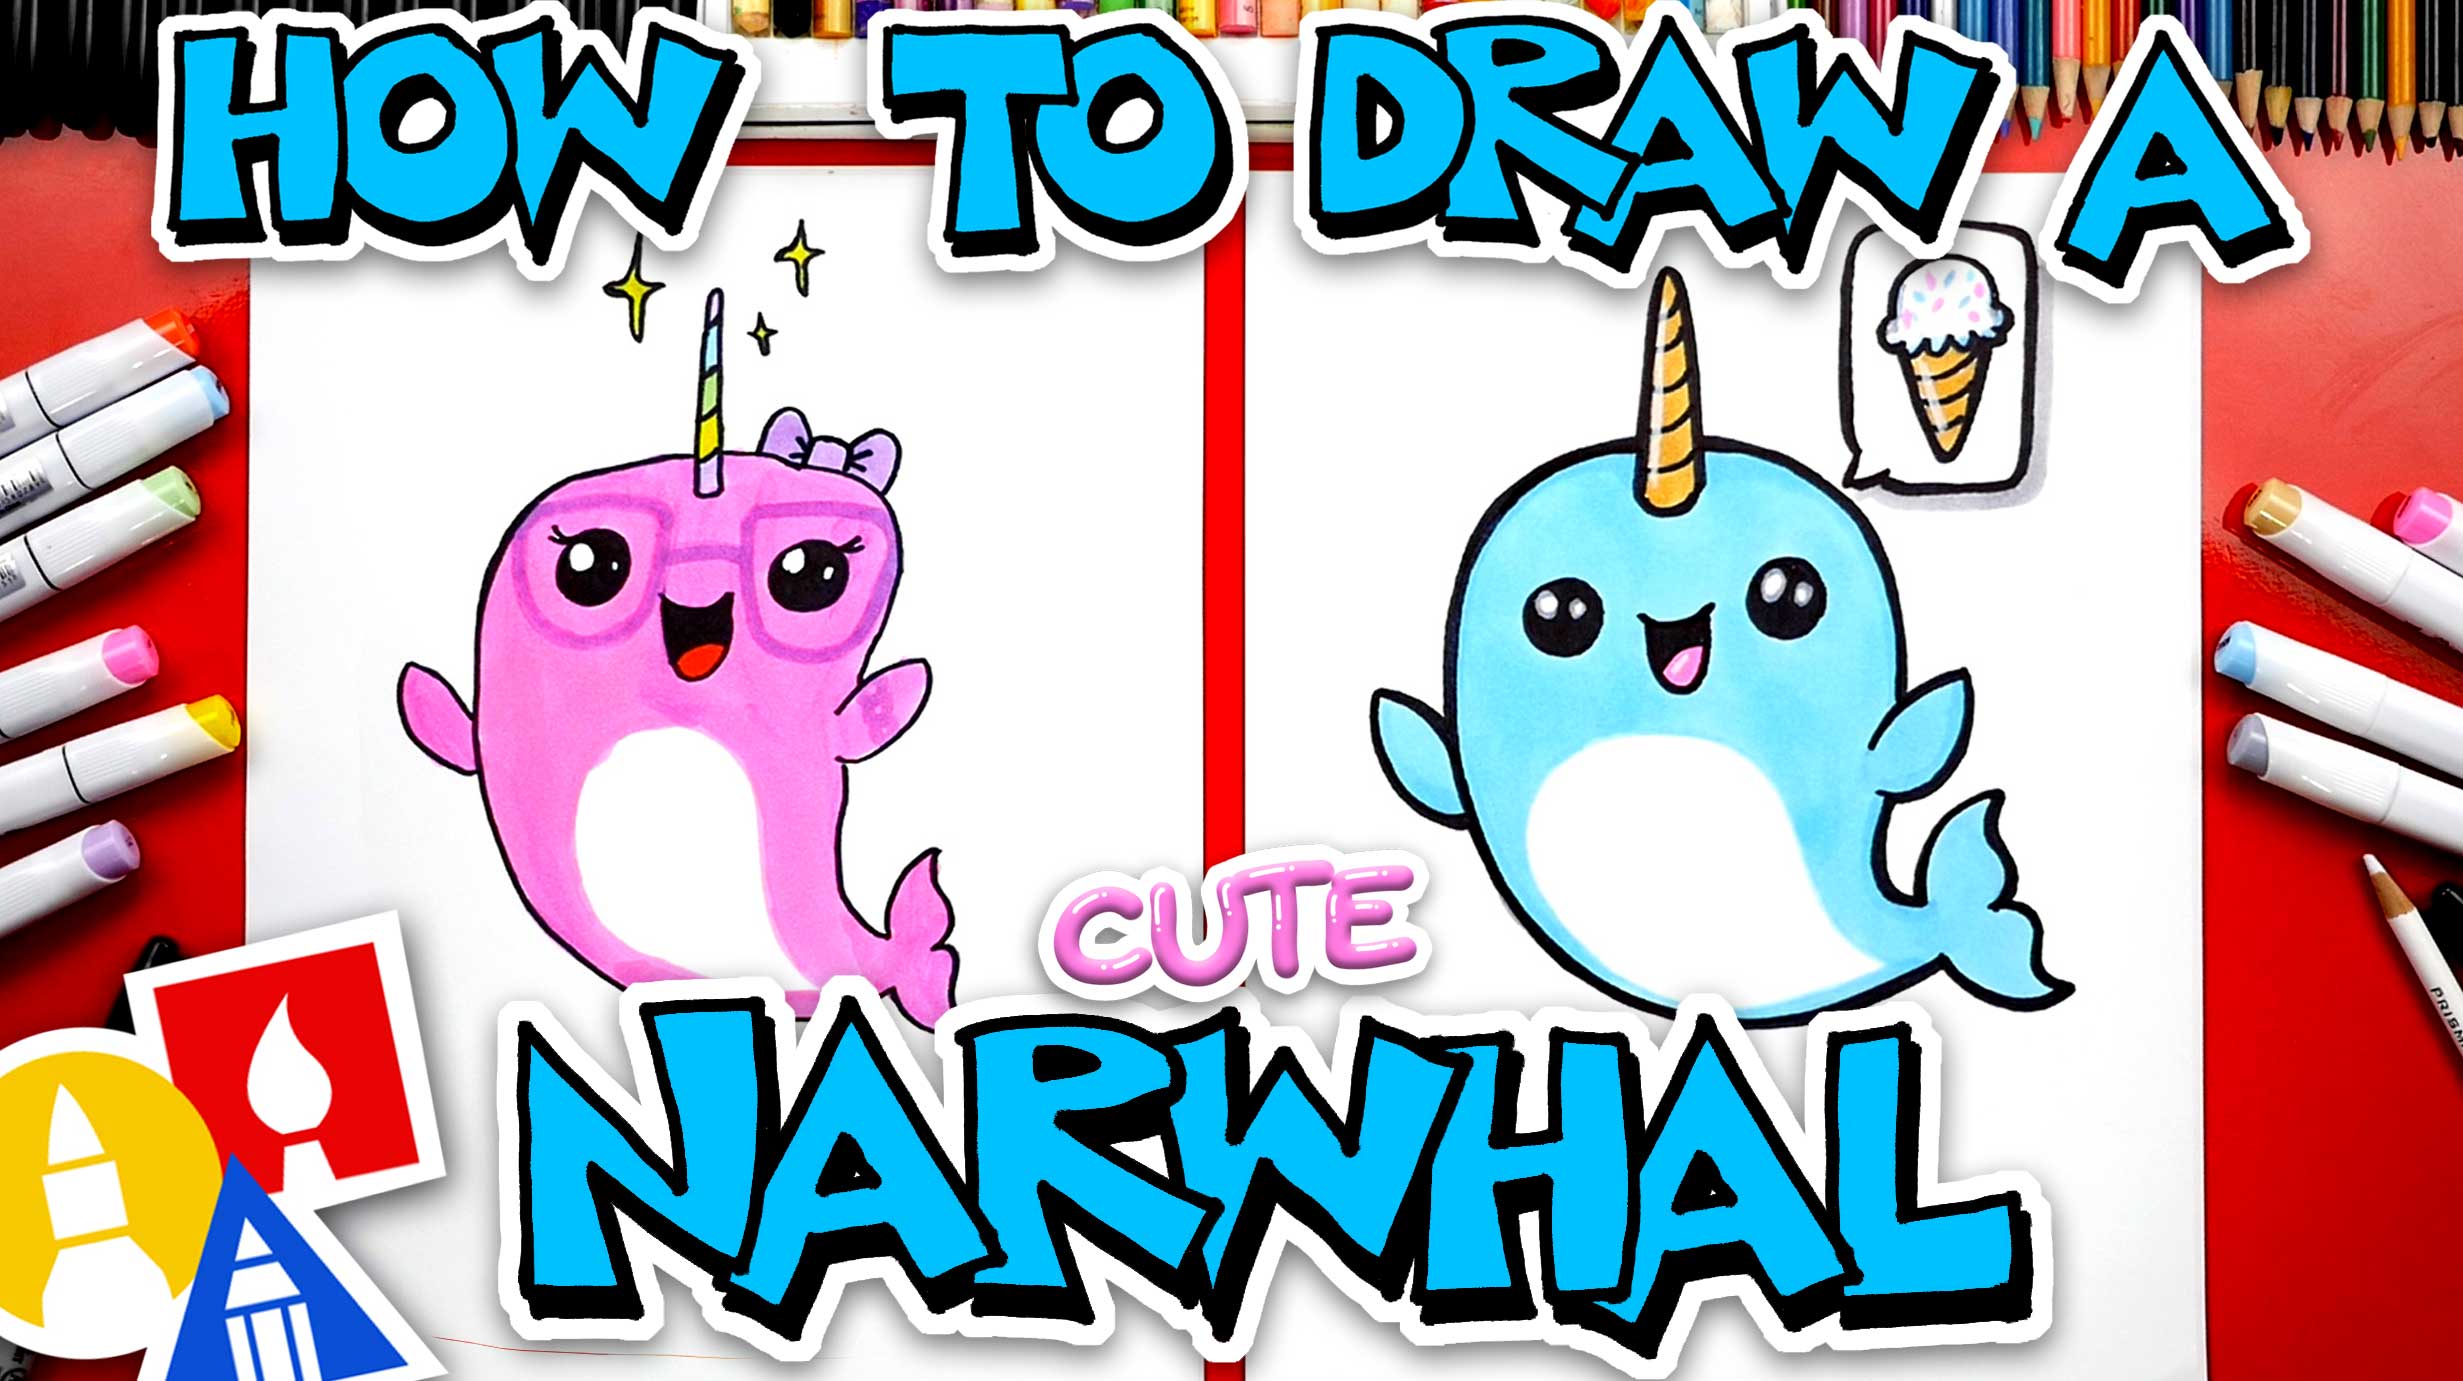 How To Draw A Cute Cartoon Narwhal Art For Kids Hub